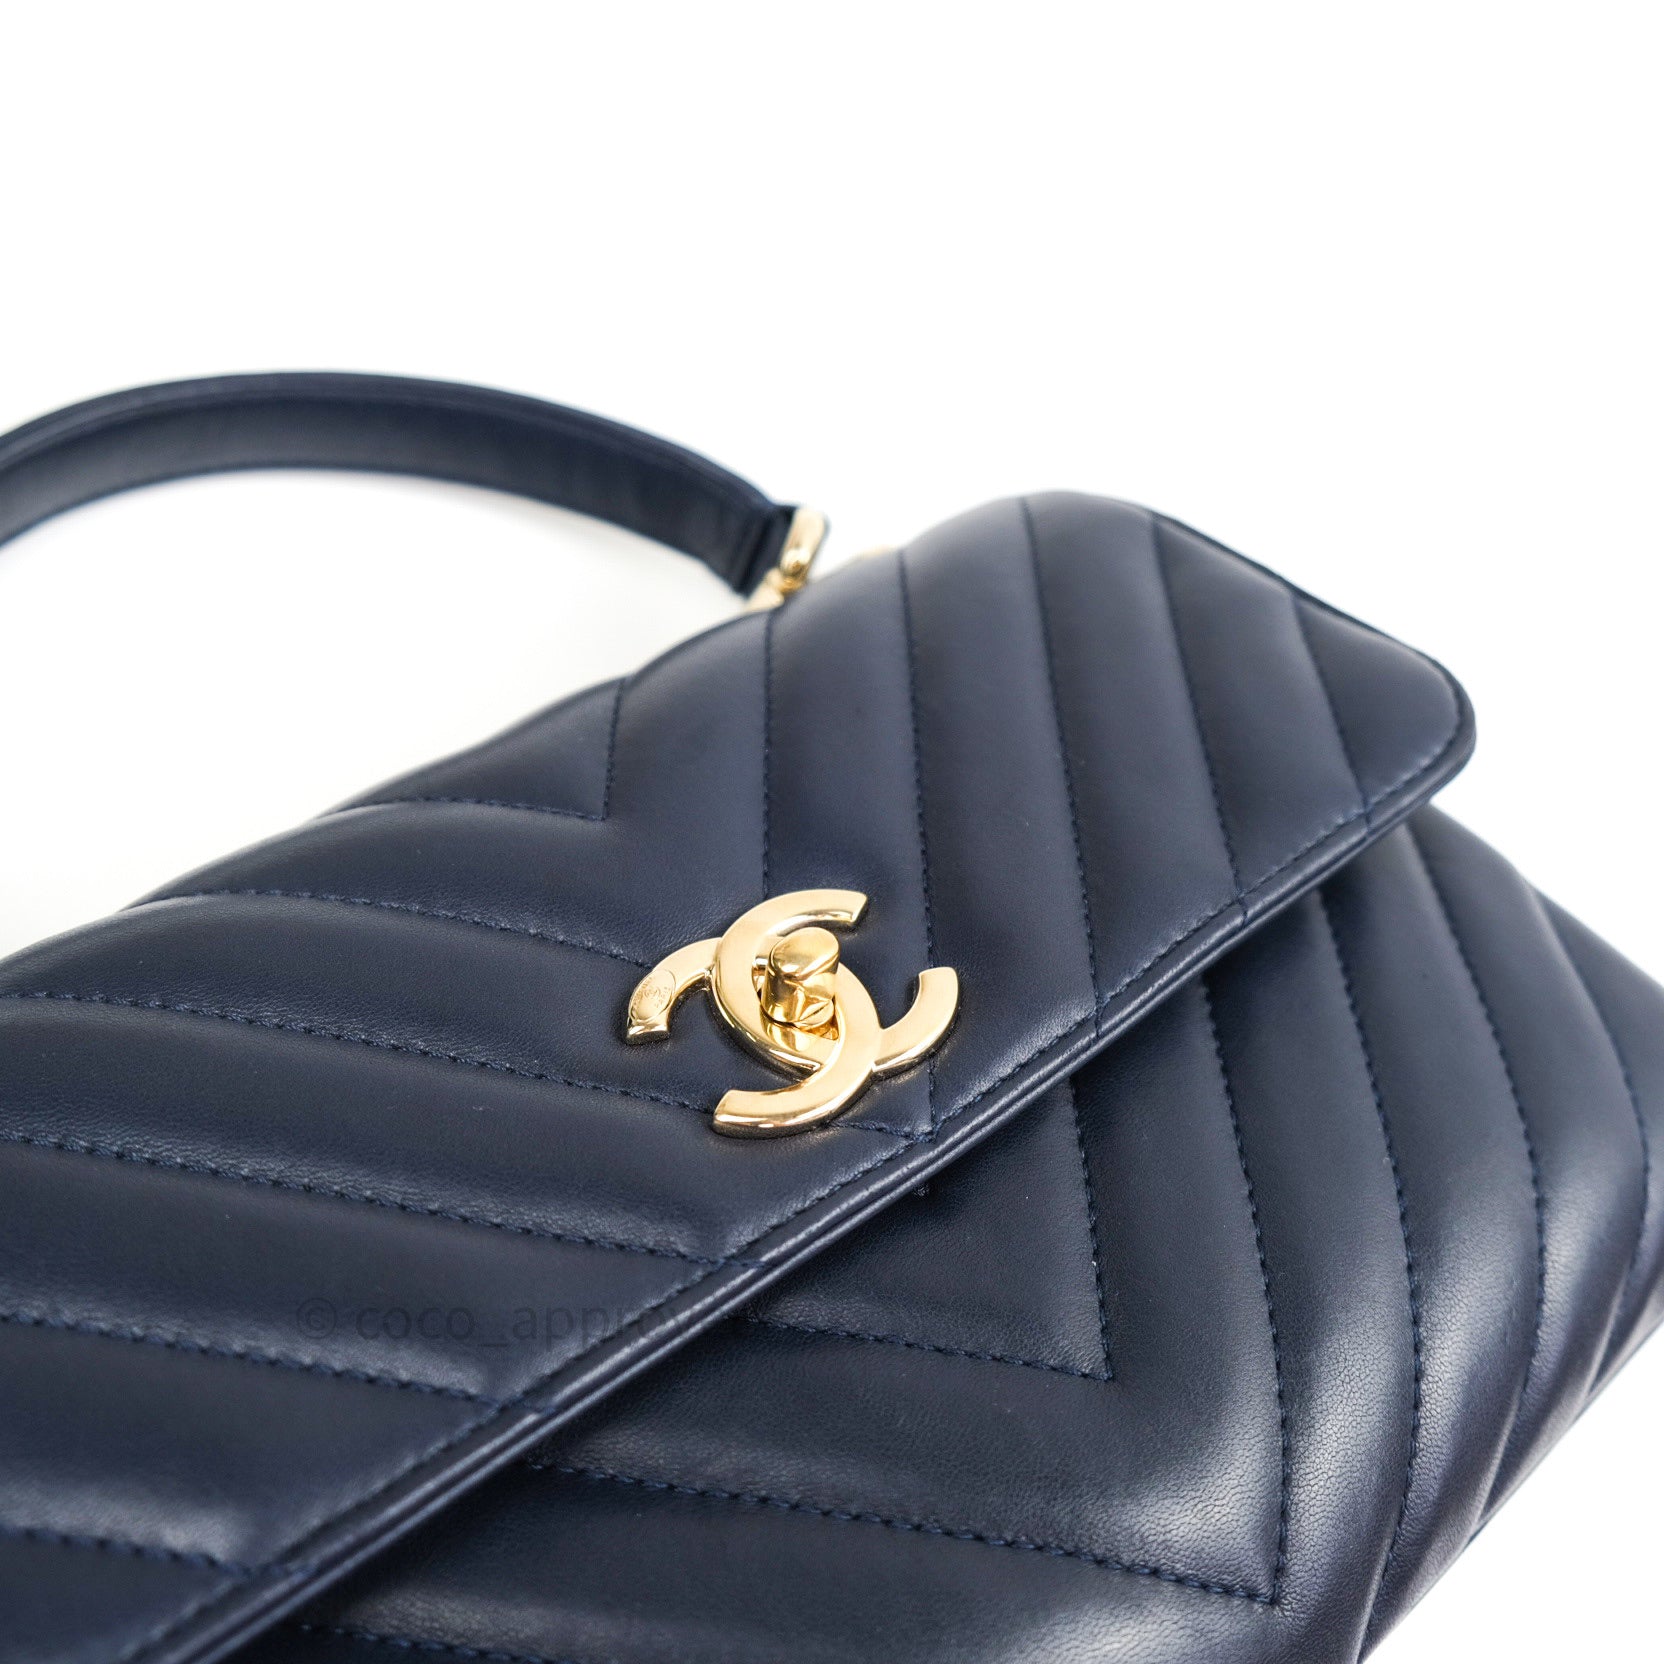 Chanel Navy Blue Quilted Lambskin Trendy CC Flap Bag With Chain